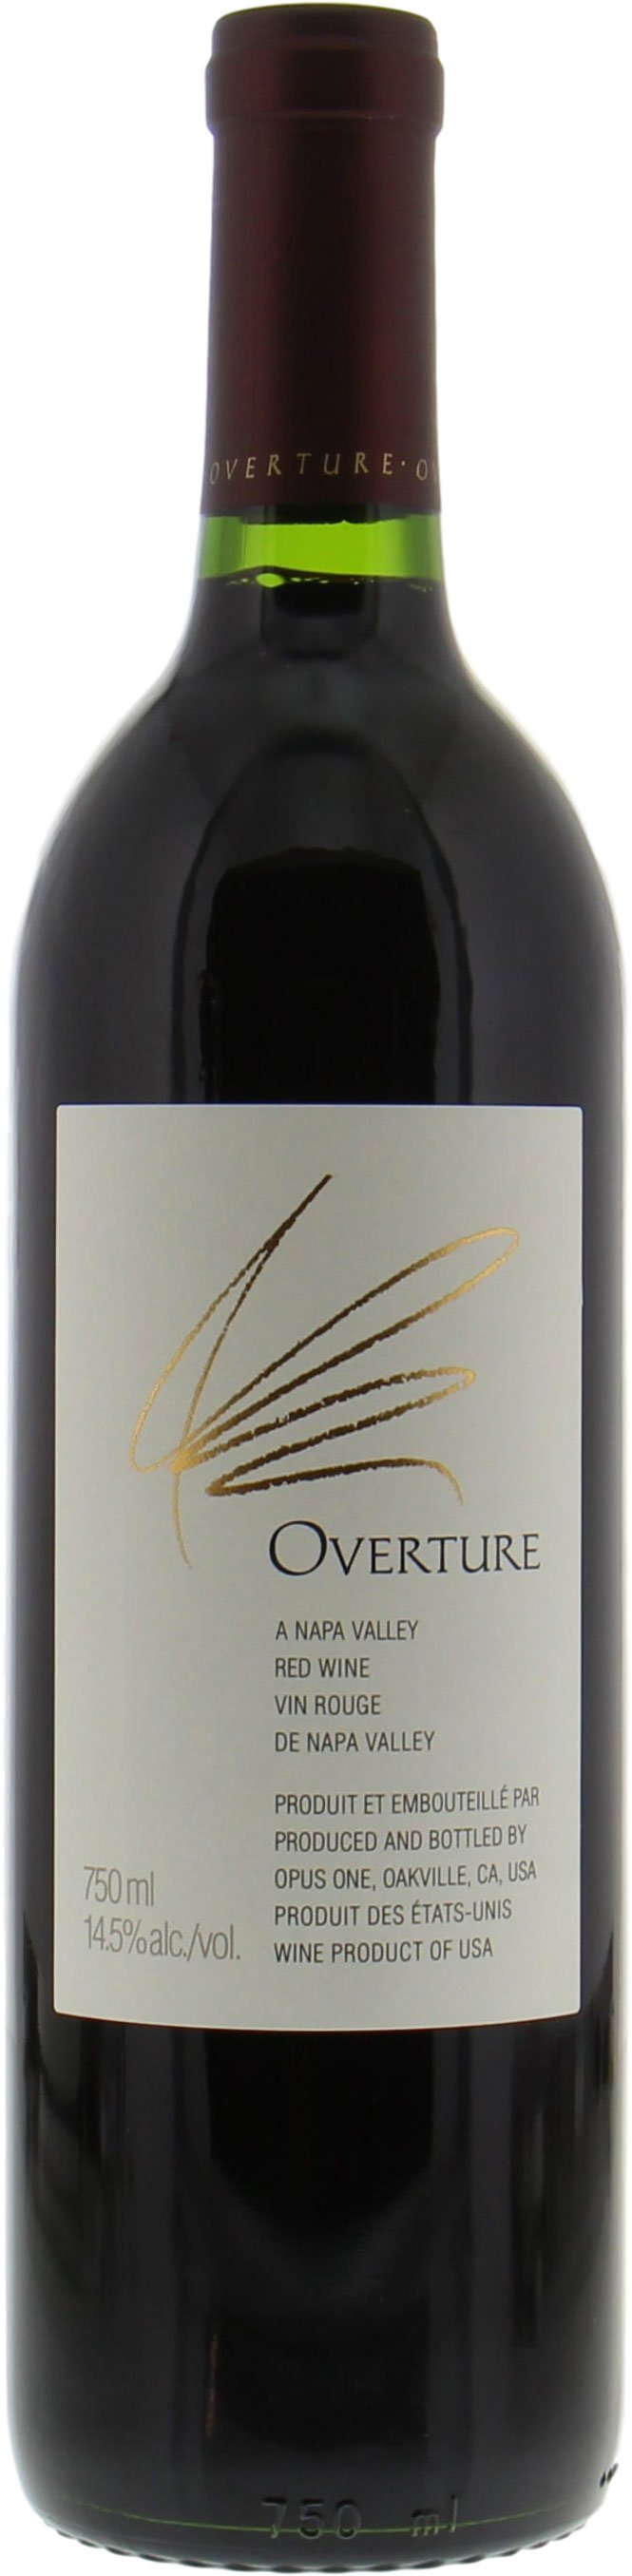 Opus One - Overture release 2017 2017